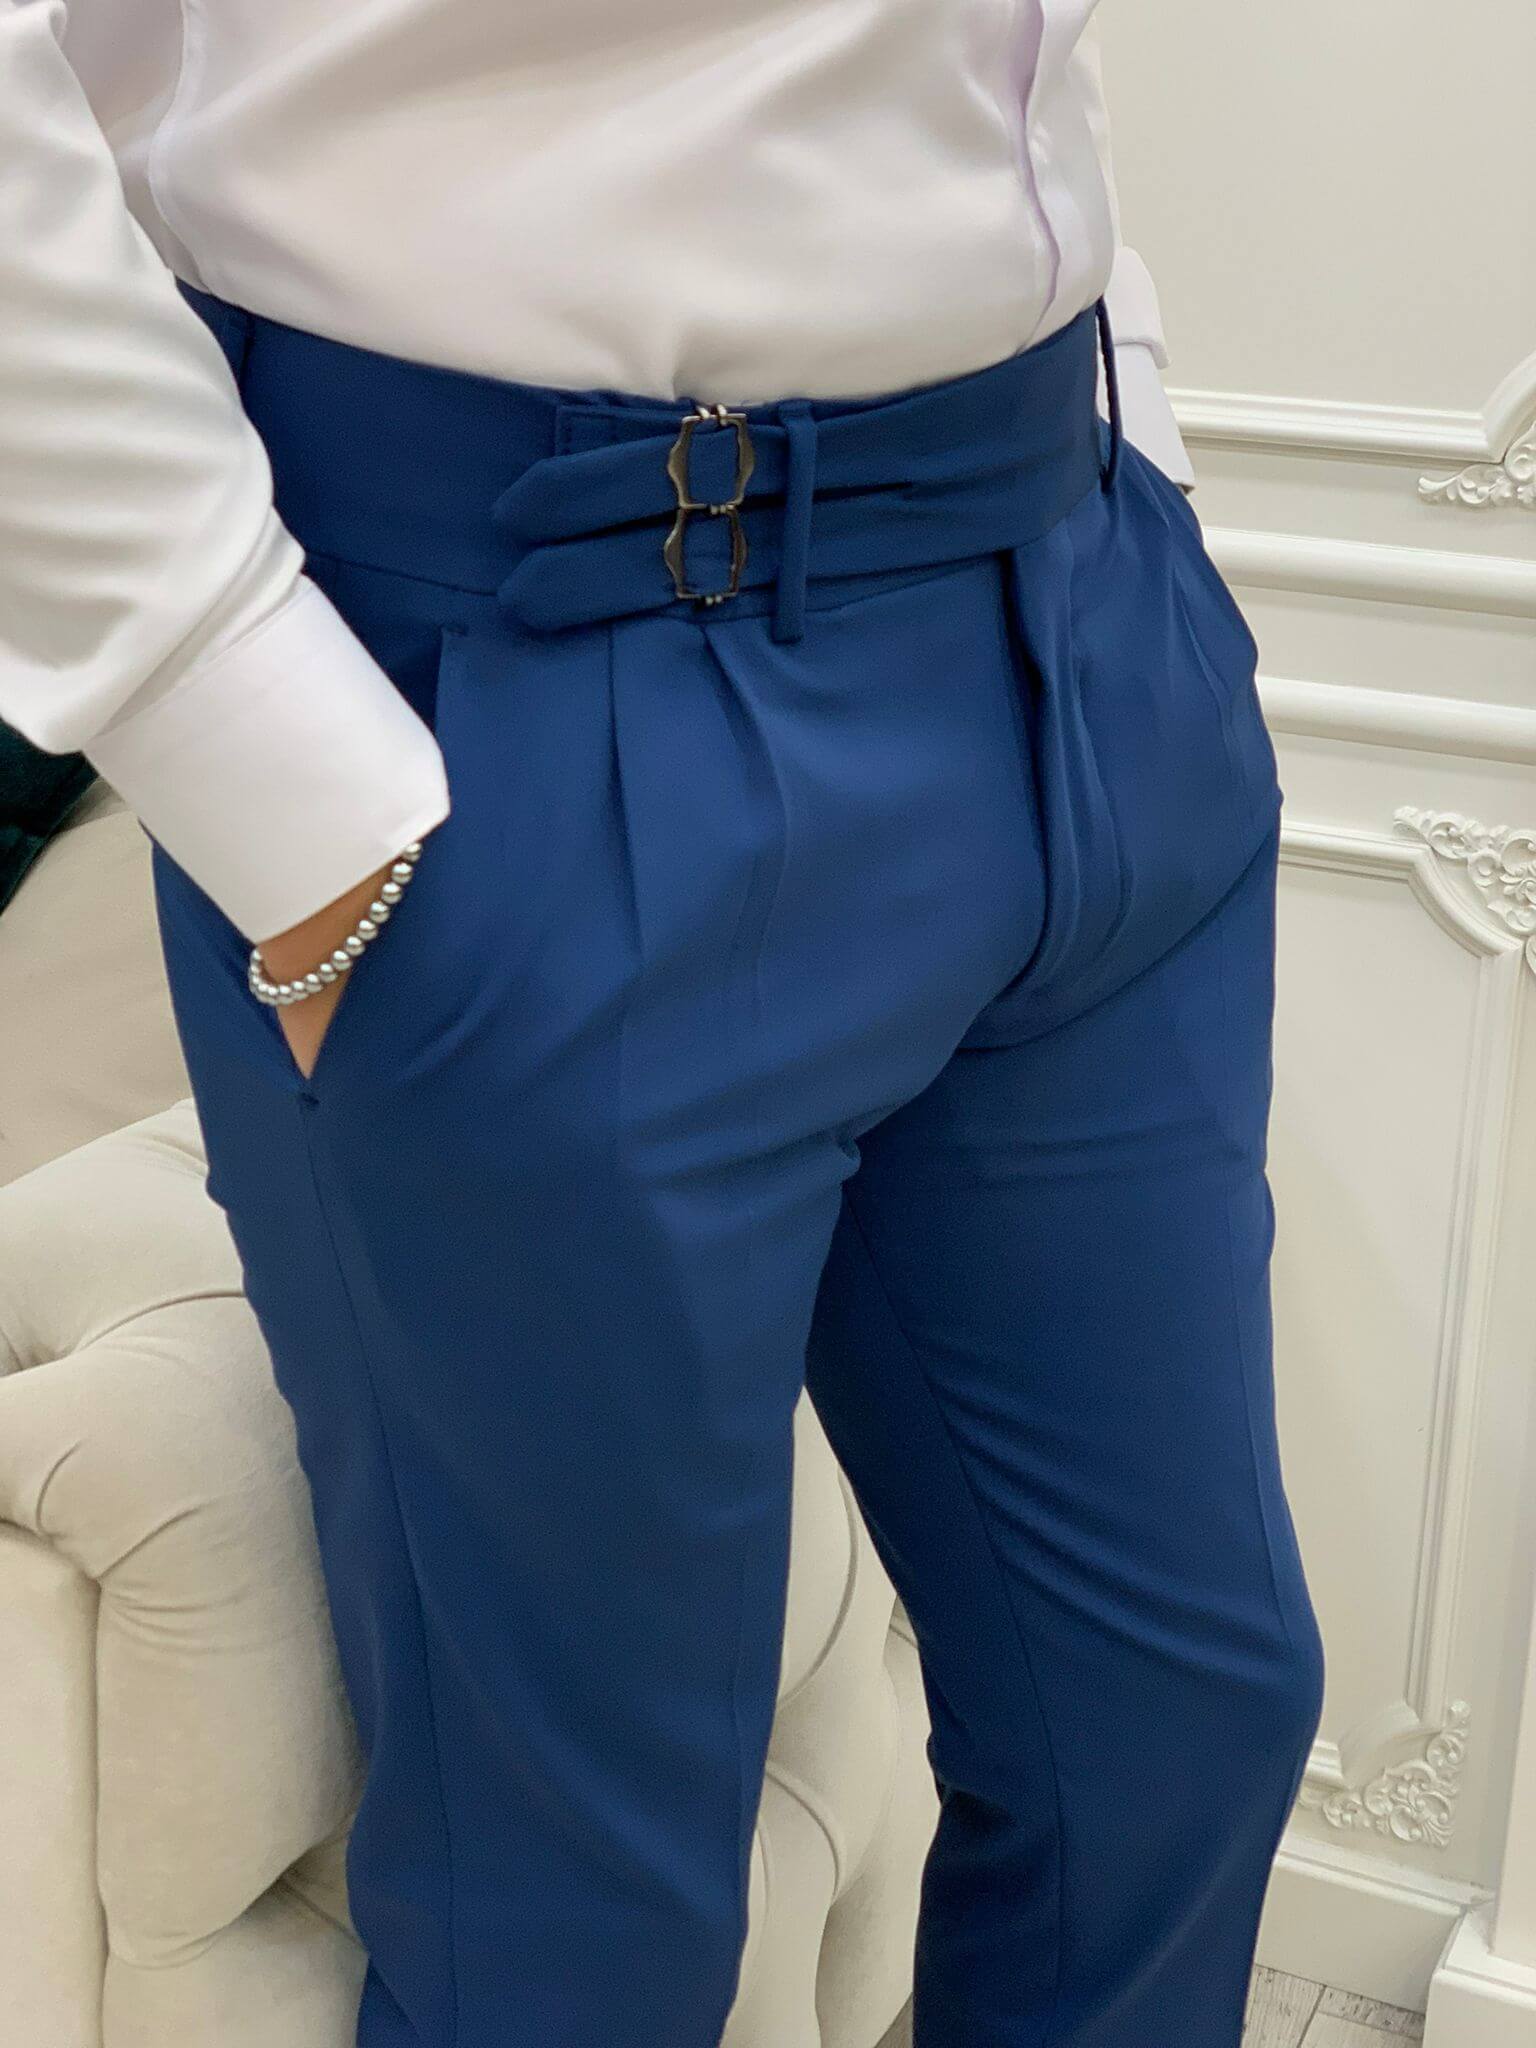 Hollo Blue Buckled Pants: Sleek and stylish pants with eye-catching buckled details